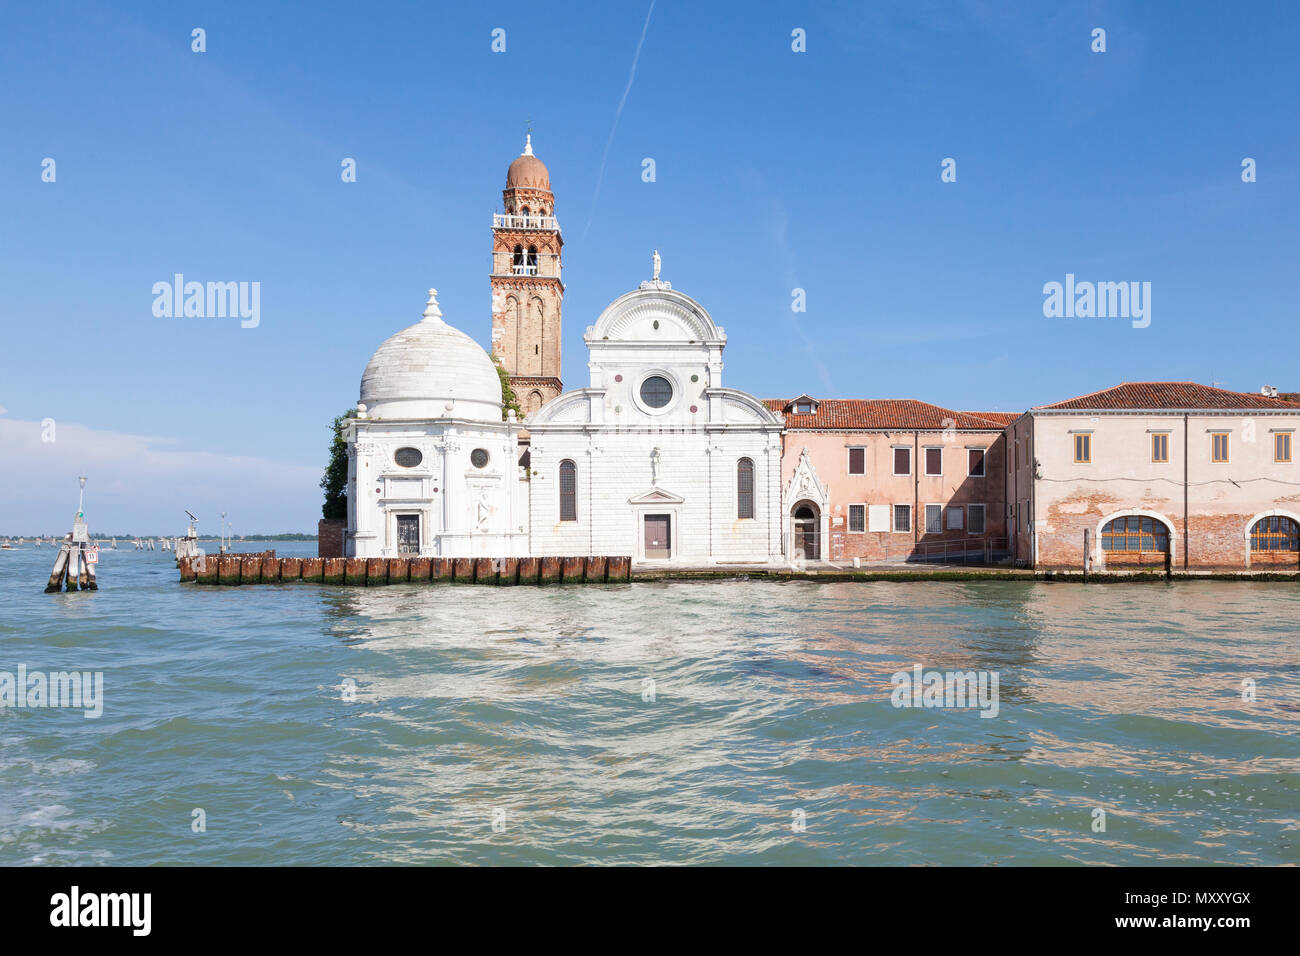 The Renaissance facade and bell tower of Chiesa di San Michele in Isola, San Michele Island, Venice, Veneto, Italy. Built 1469. Cemetery island. Monas Stock Photo